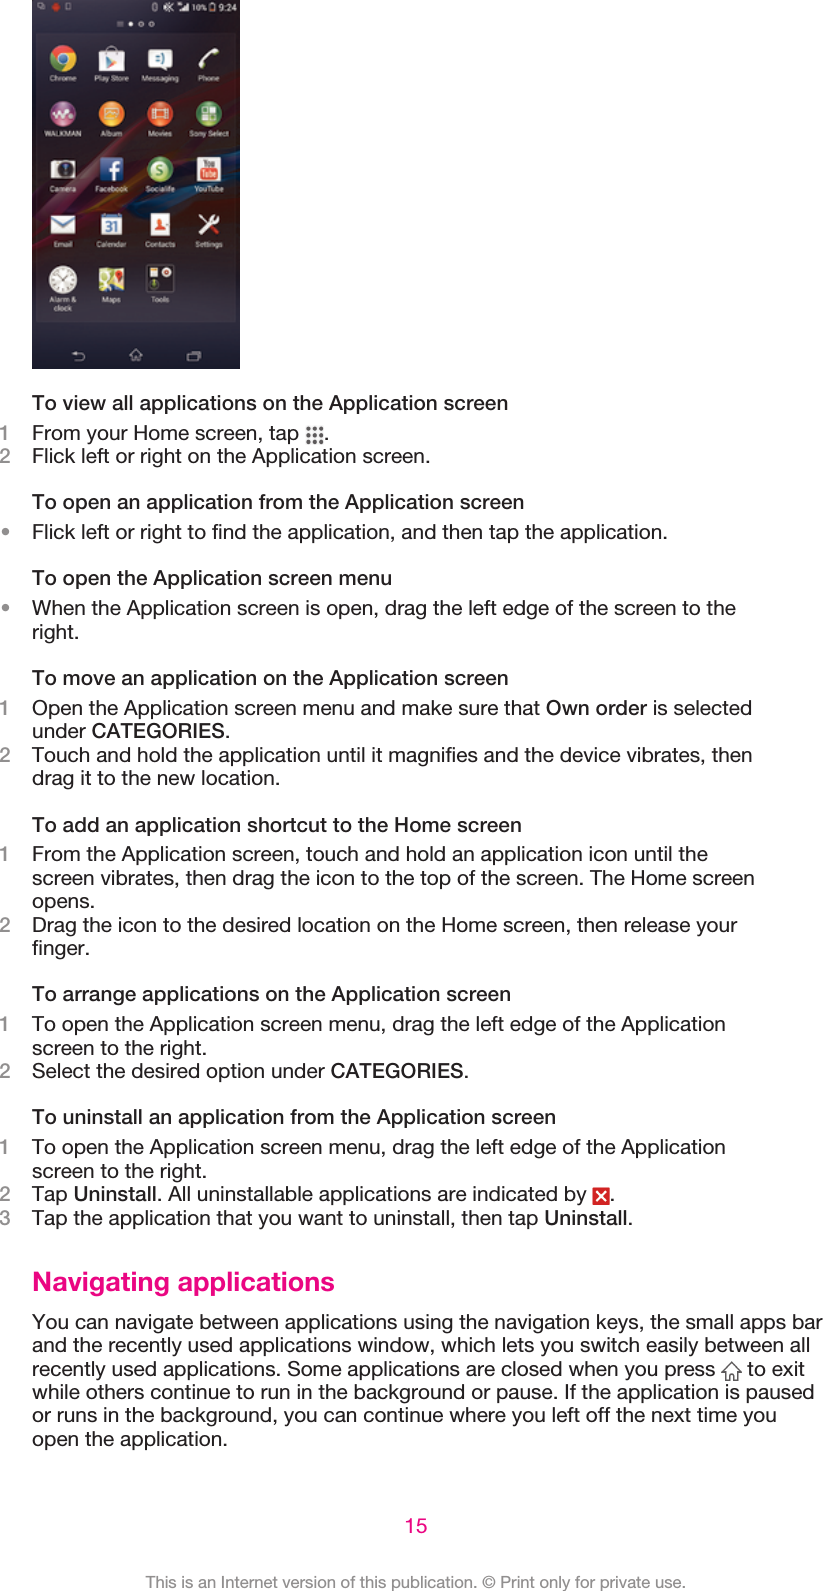 To view all applications on the Application screen1From your Home screen, tap  .2Flick left or right on the Application screen.To open an application from the Application screen•Flick left or right to find the application, and then tap the application.To open the Application screen menu•When the Application screen is open, drag the left edge of the screen to theright.To move an application on the Application screen1Open the Application screen menu and make sure that Own order is selectedunder CATEGORIES.2Touch and hold the application until it magnifies and the device vibrates, thendrag it to the new location.To add an application shortcut to the Home screen1From the Application screen, touch and hold an application icon until thescreen vibrates, then drag the icon to the top of the screen. The Home screenopens.2Drag the icon to the desired location on the Home screen, then release yourfinger.To arrange applications on the Application screen1To open the Application screen menu, drag the left edge of the Applicationscreen to the right.2Select the desired option under CATEGORIES.To uninstall an application from the Application screen1To open the Application screen menu, drag the left edge of the Applicationscreen to the right.2Tap Uninstall. All uninstallable applications are indicated by  .3Tap the application that you want to uninstall, then tap Uninstall.Navigating applicationsYou can navigate between applications using the navigation keys, the small apps barand the recently used applications window, which lets you switch easily between allrecently used applications. Some applications are closed when you press   to exitwhile others continue to run in the background or pause. If the application is pausedor runs in the background, you can continue where you left off the next time youopen the application.15This is an Internet version of this publication. © Print only for private use.